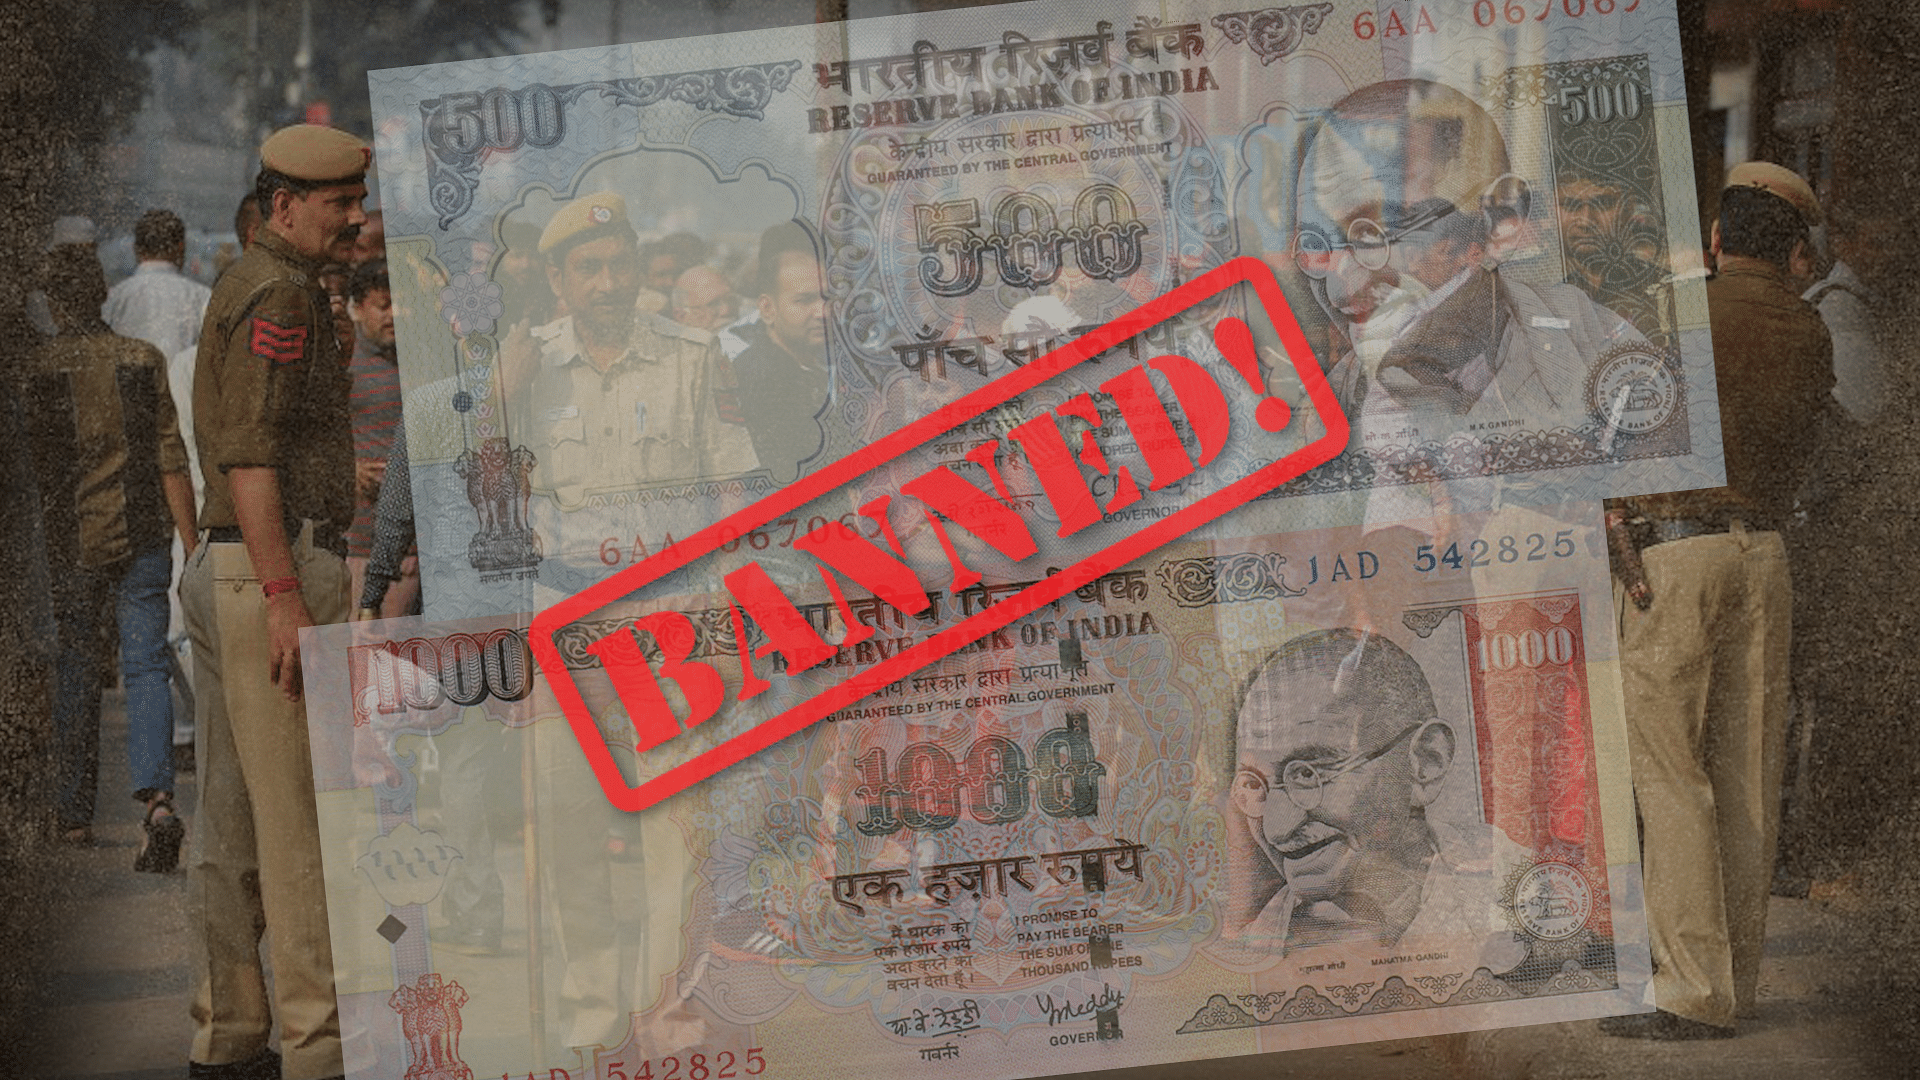 Demonetisation and the banning of notes.